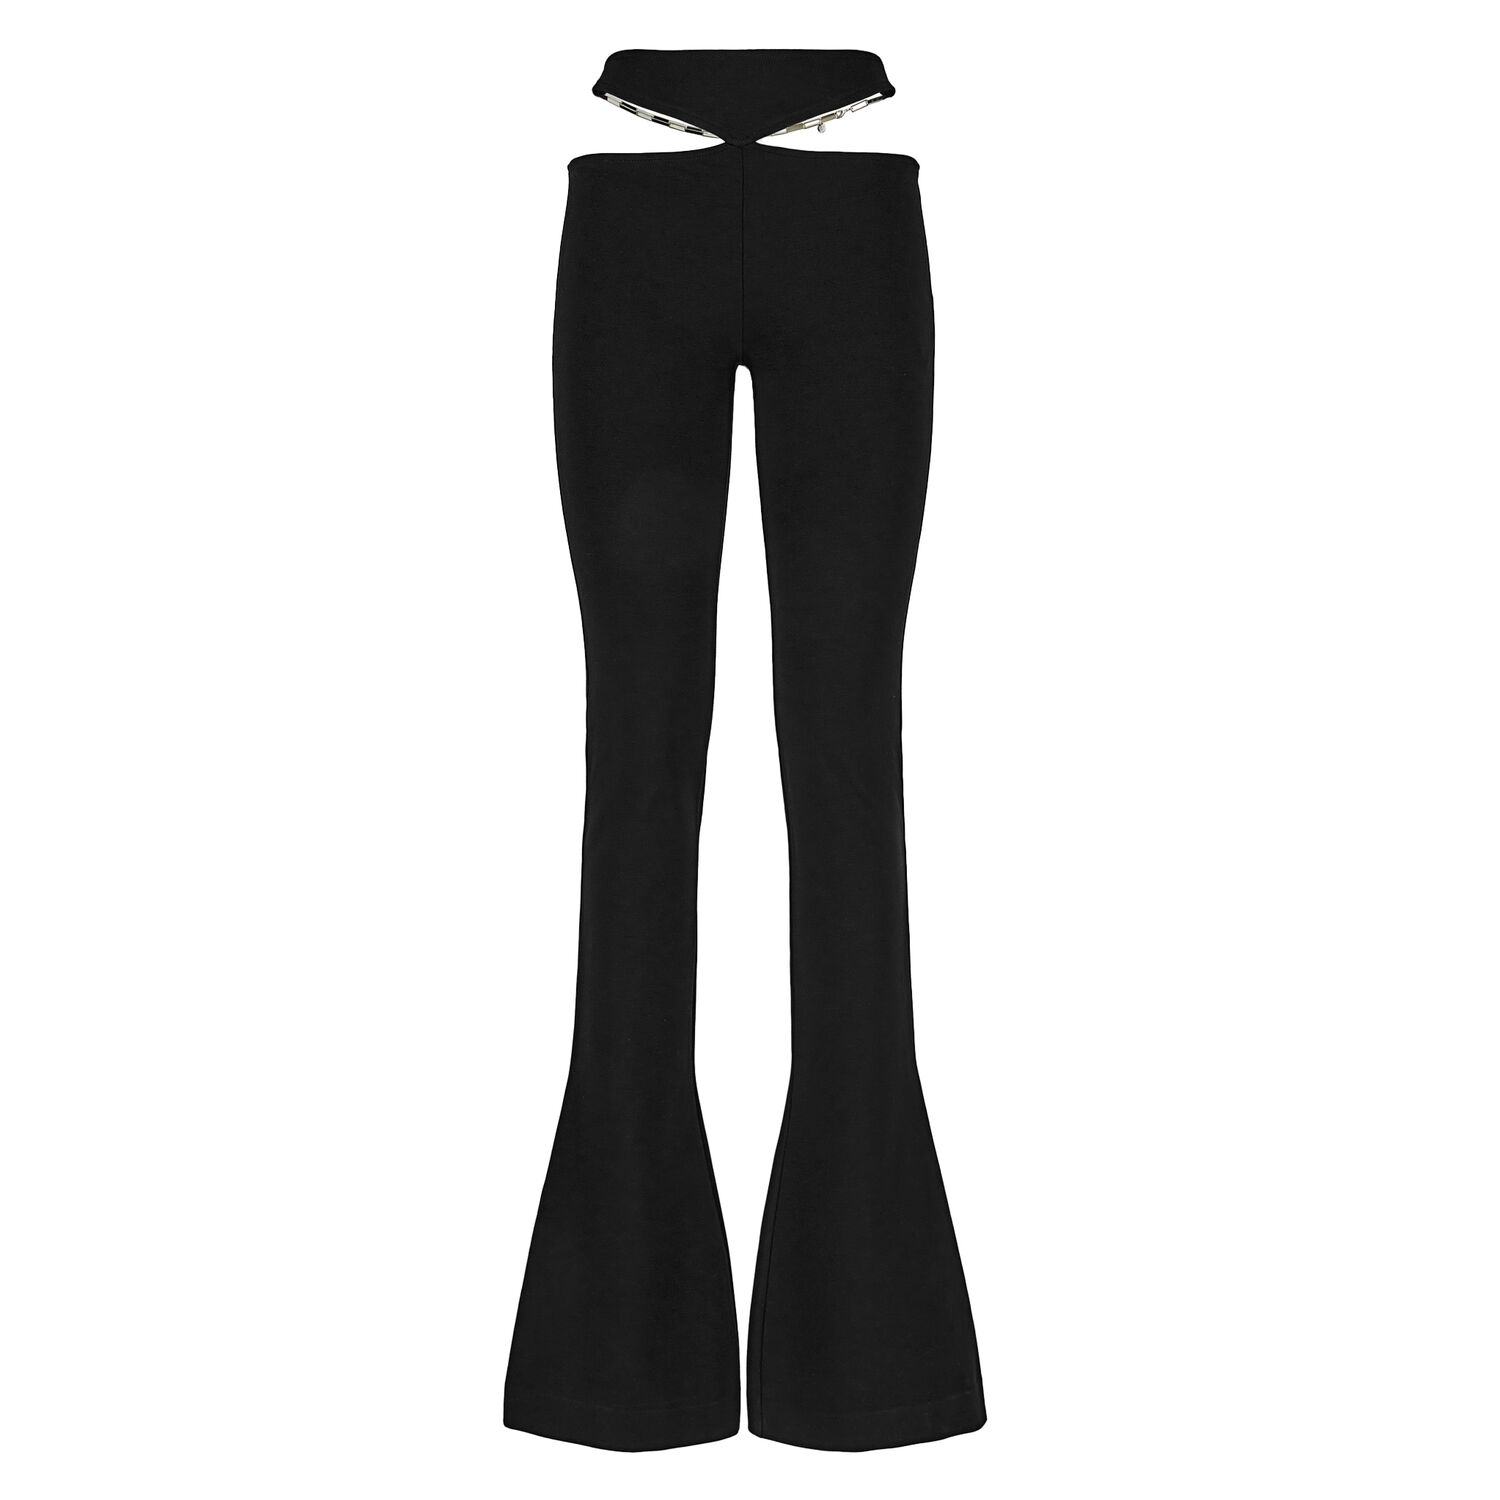 Brunita Pants - Mid Waisted Relaxed Elastic Waist Pants in Tile